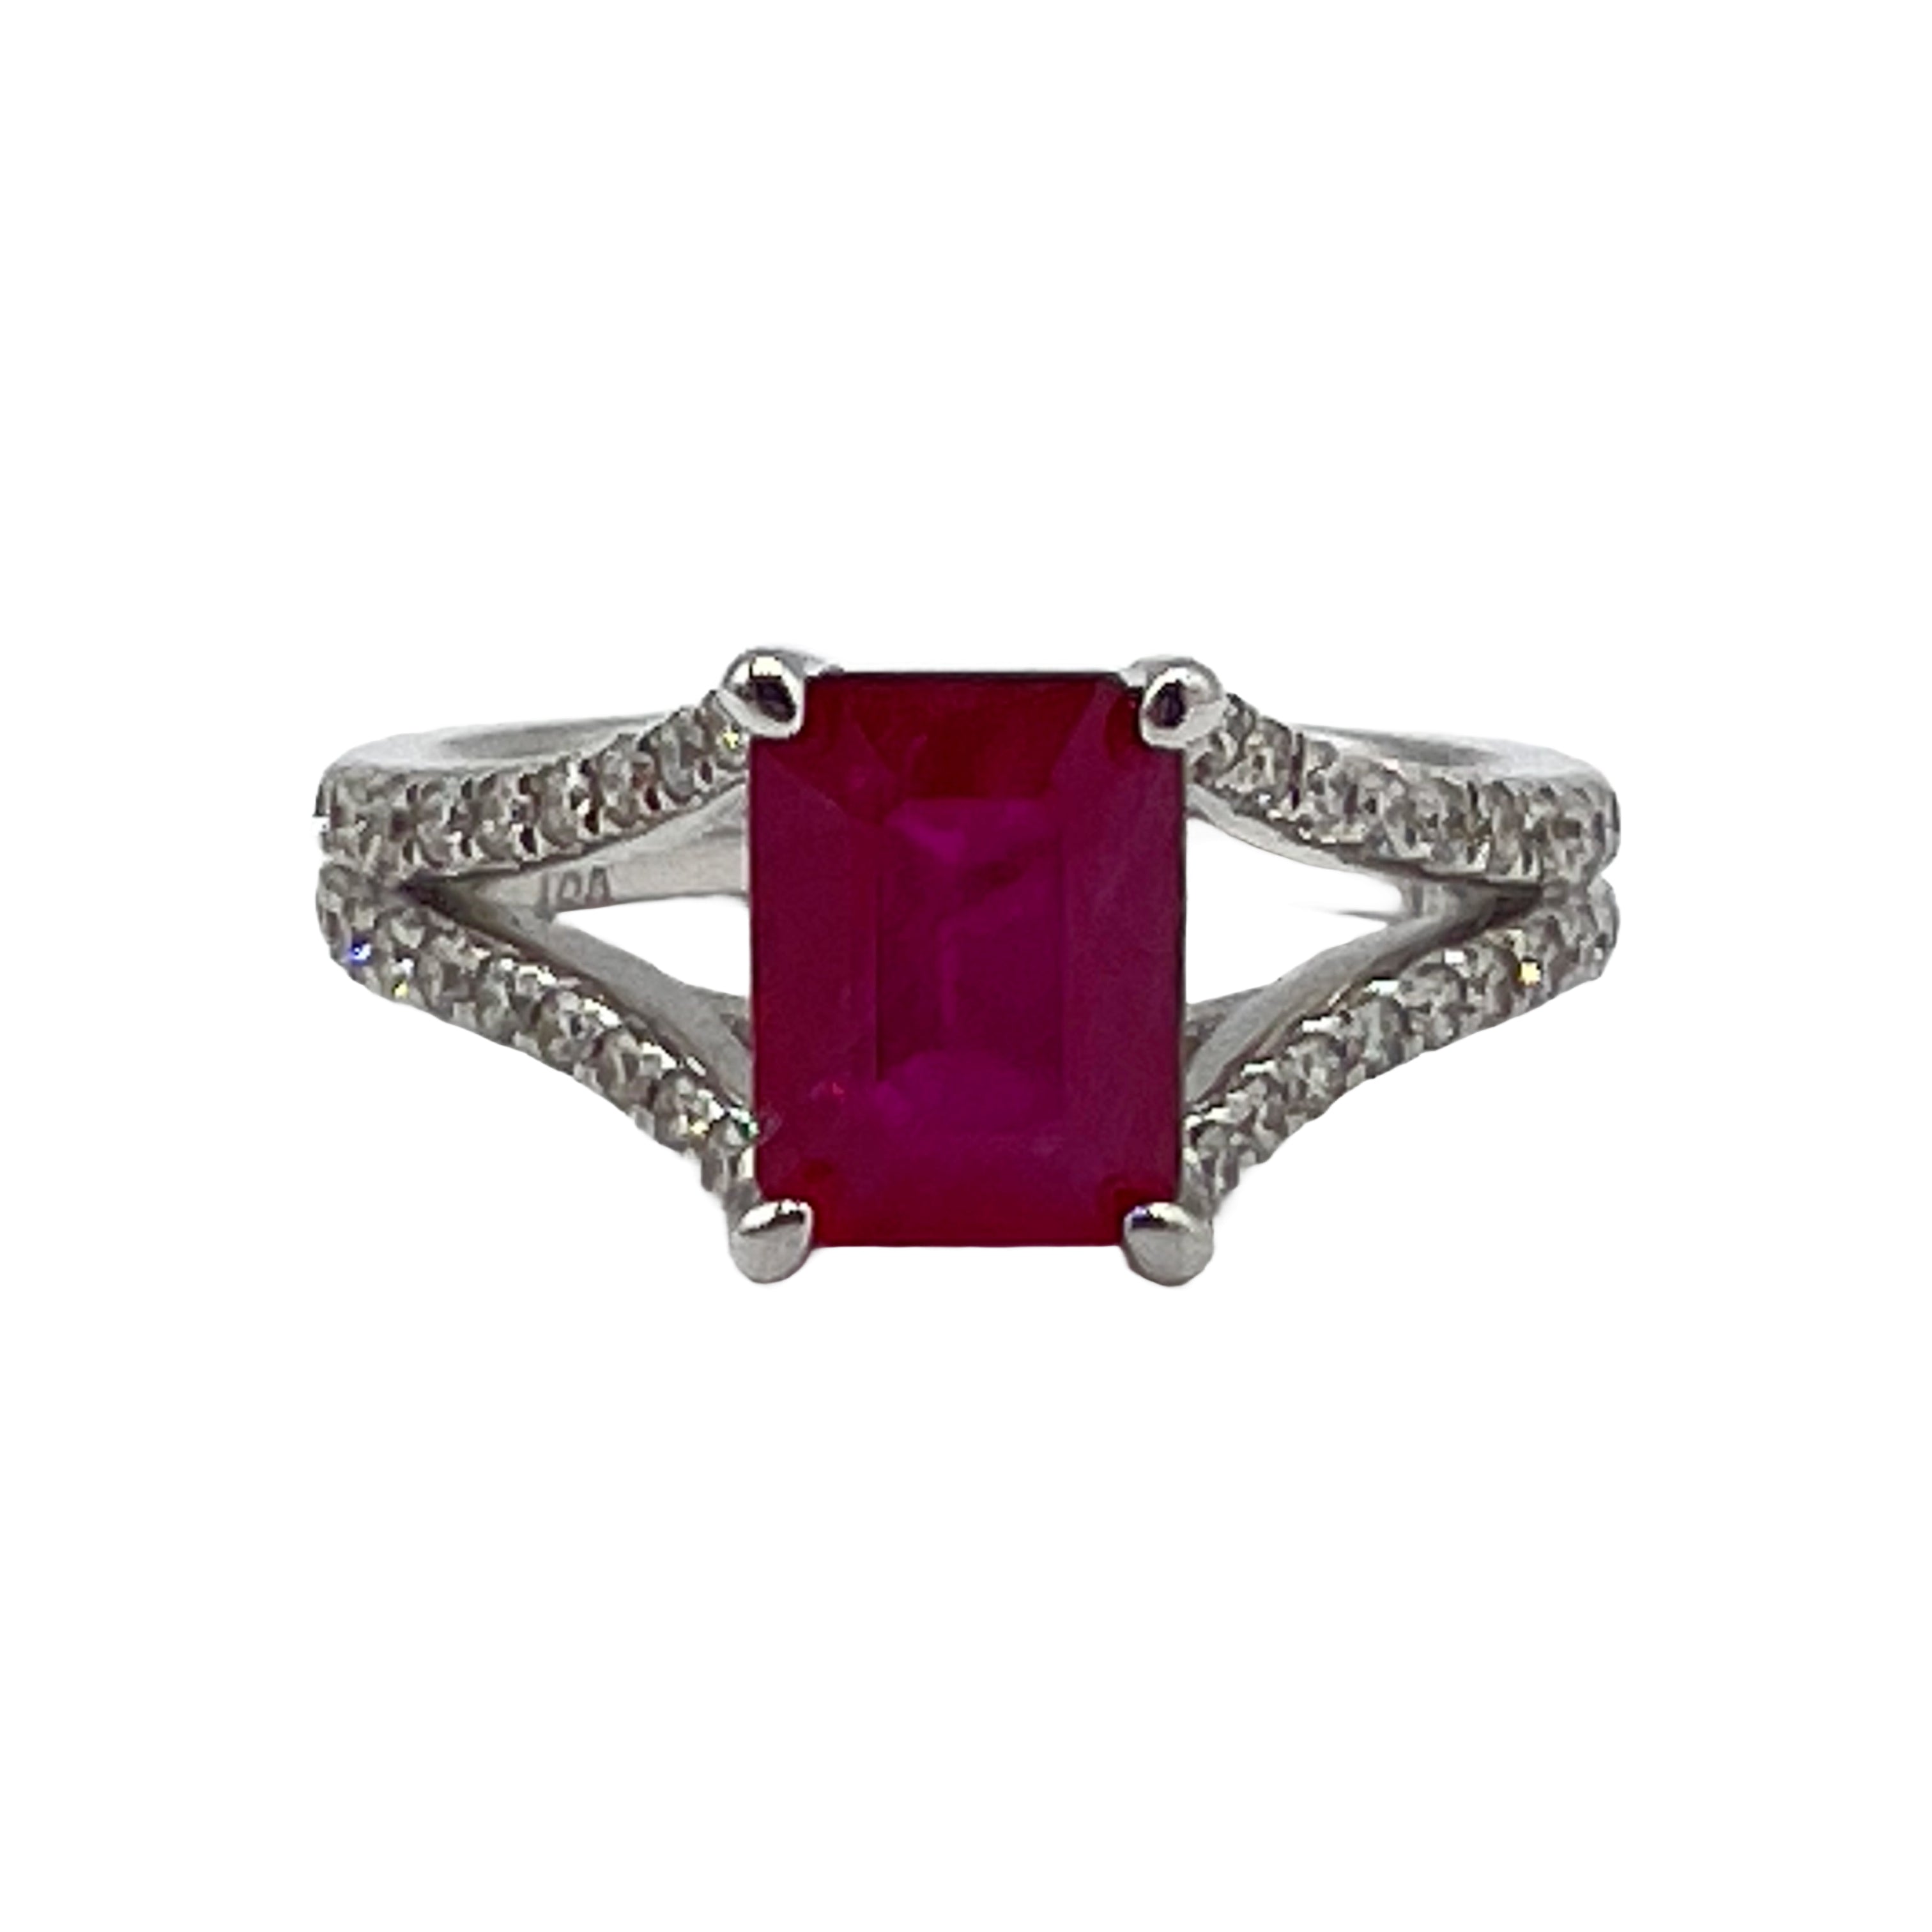 Ring 18KW/5.4G 1RUBY-1.89CT 66RD-0.49CT